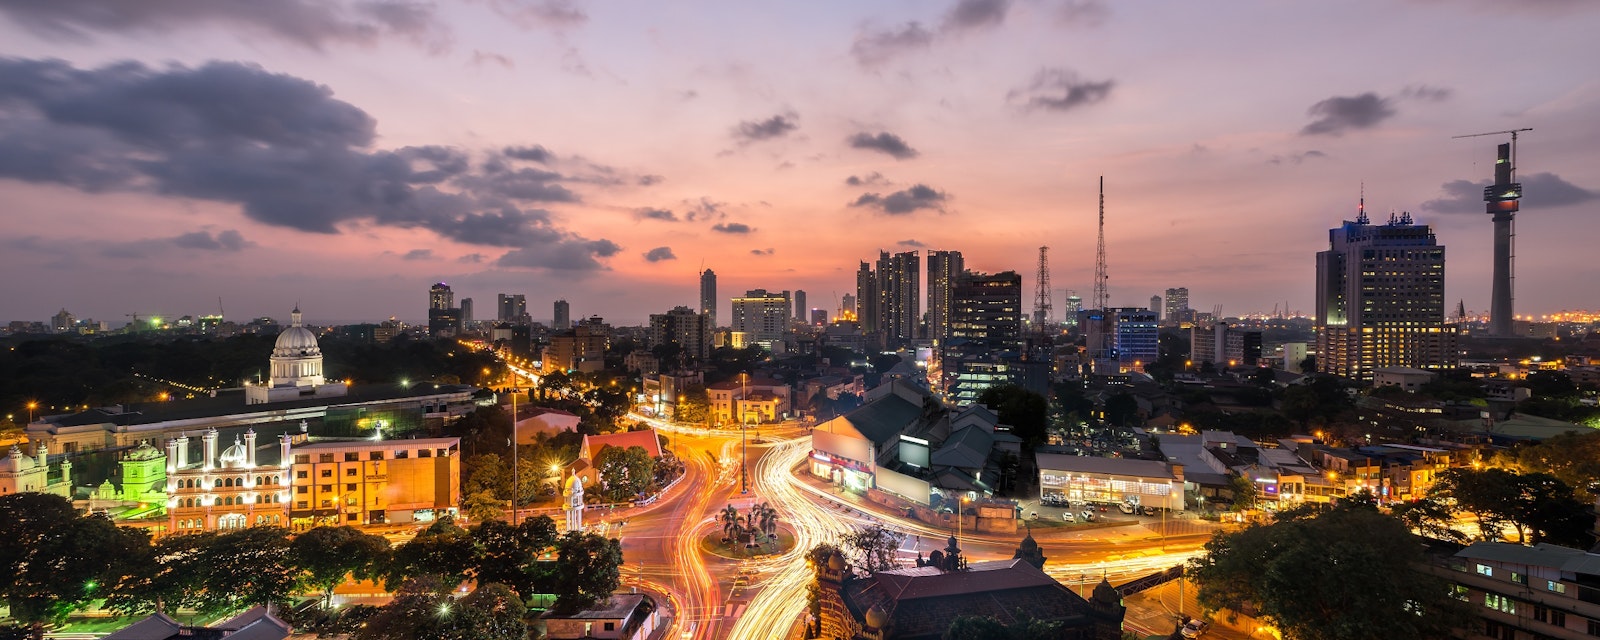 Top,View,Of,Colombo,City,At,Sunset,In,Sri,Lanka